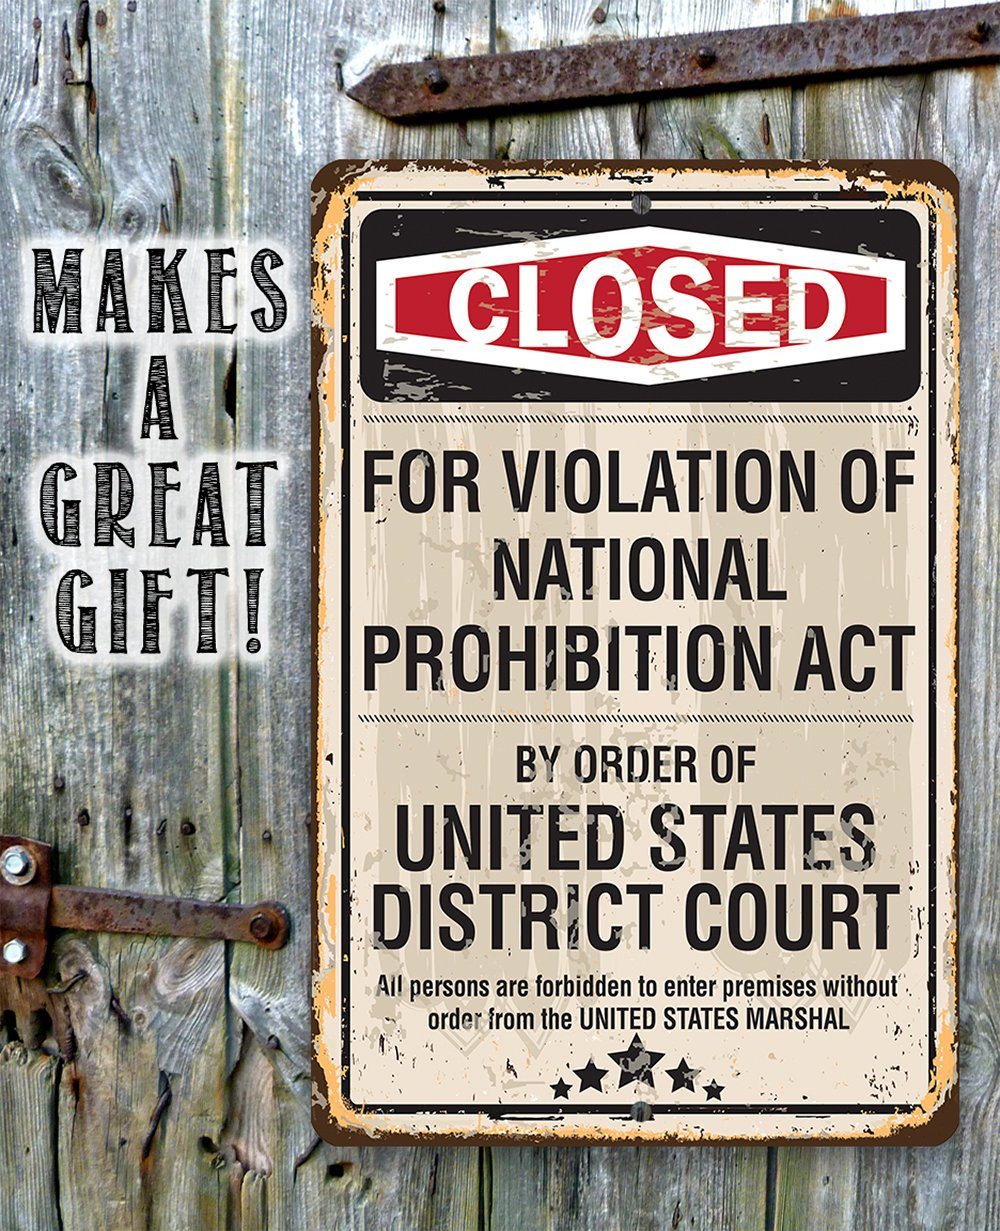 Closed For Violation of Prohibition - Metal Sign | Lone Star Art.